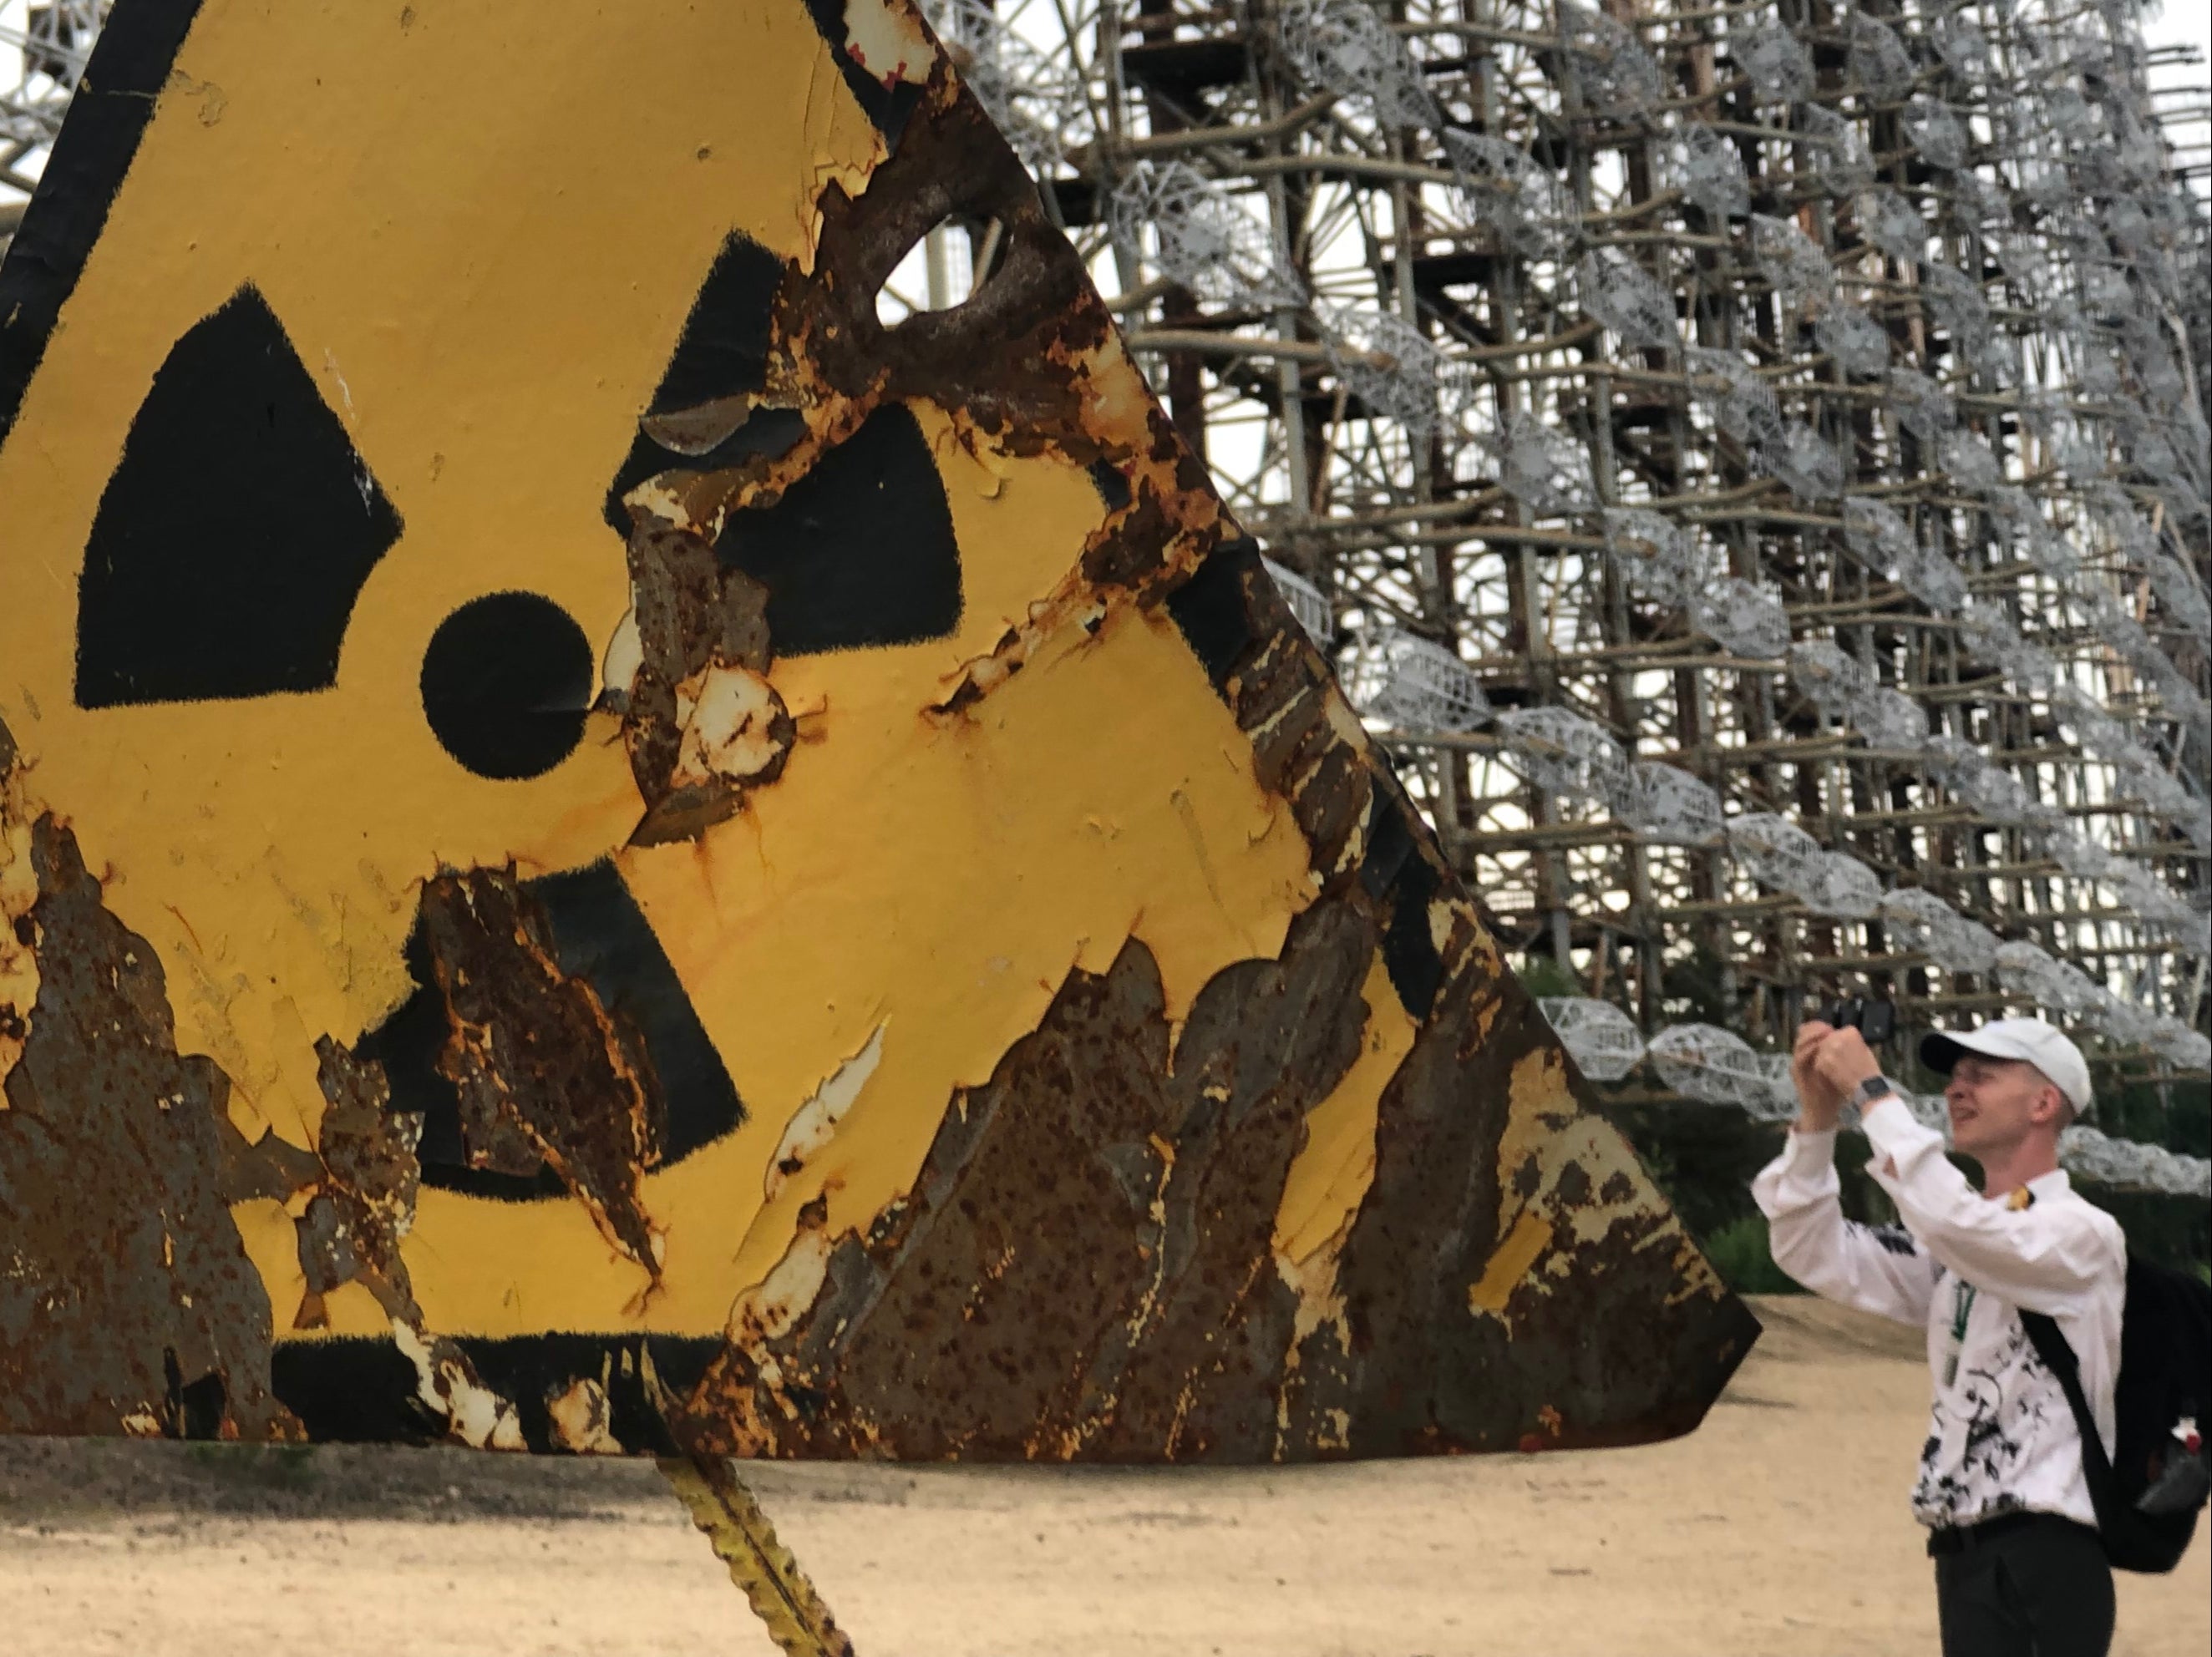 Exclusion zone: A tourist at the radar array close to the Chernobyl nuclear reactor